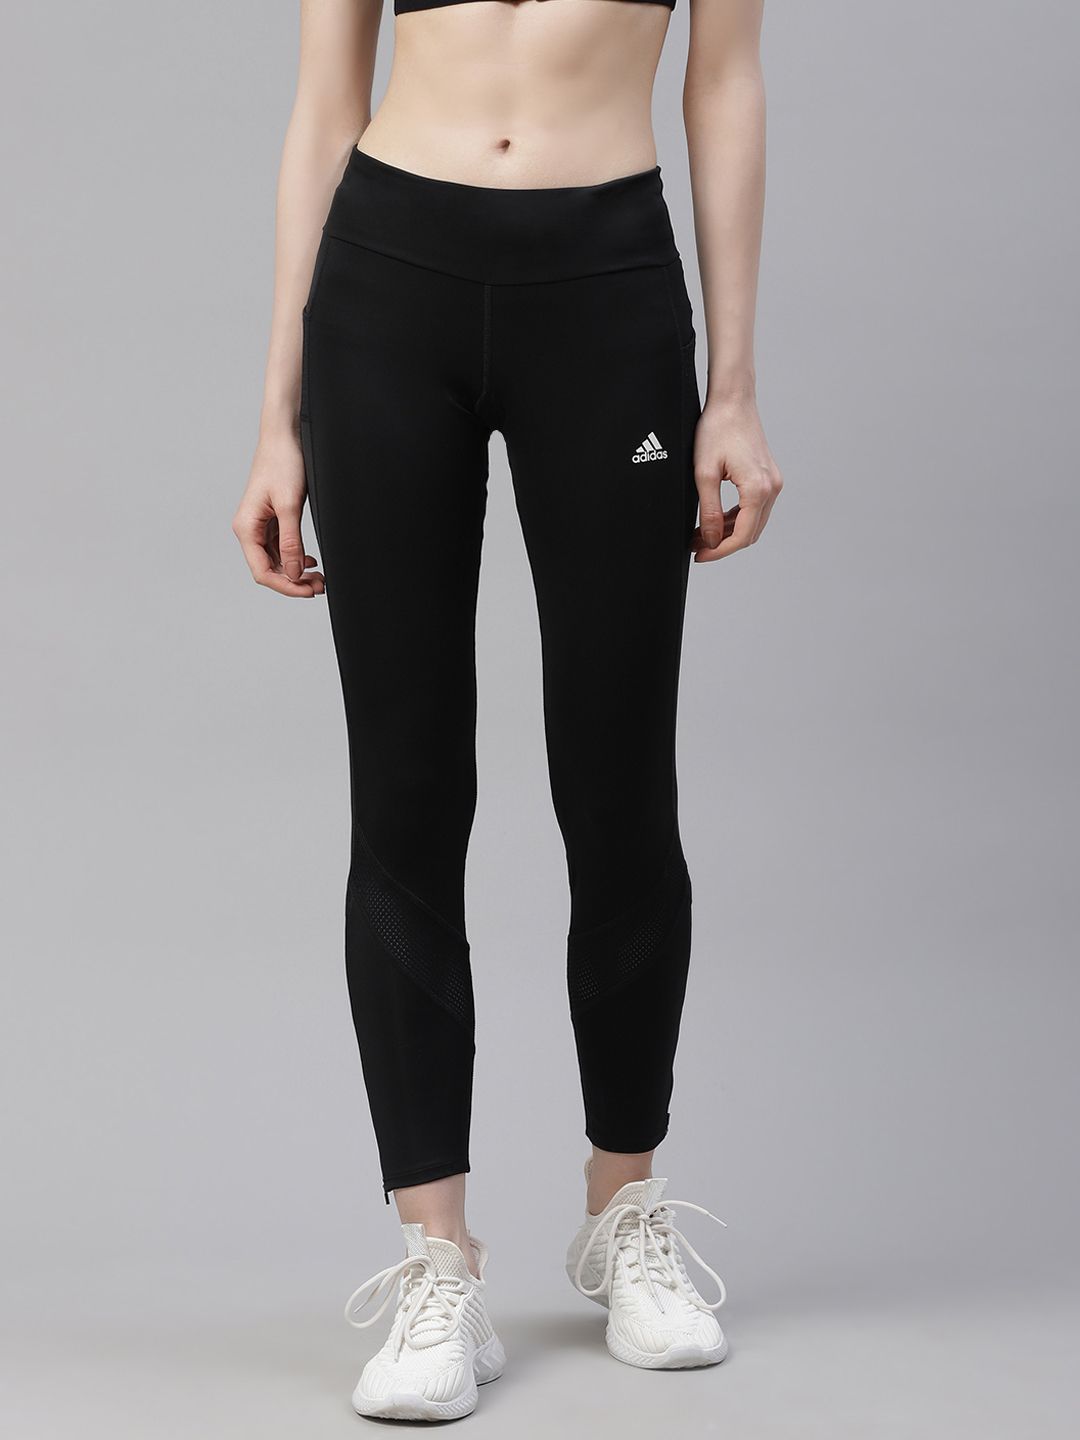 ADIDAS Women Black Solid Own The Run Tights Price in India